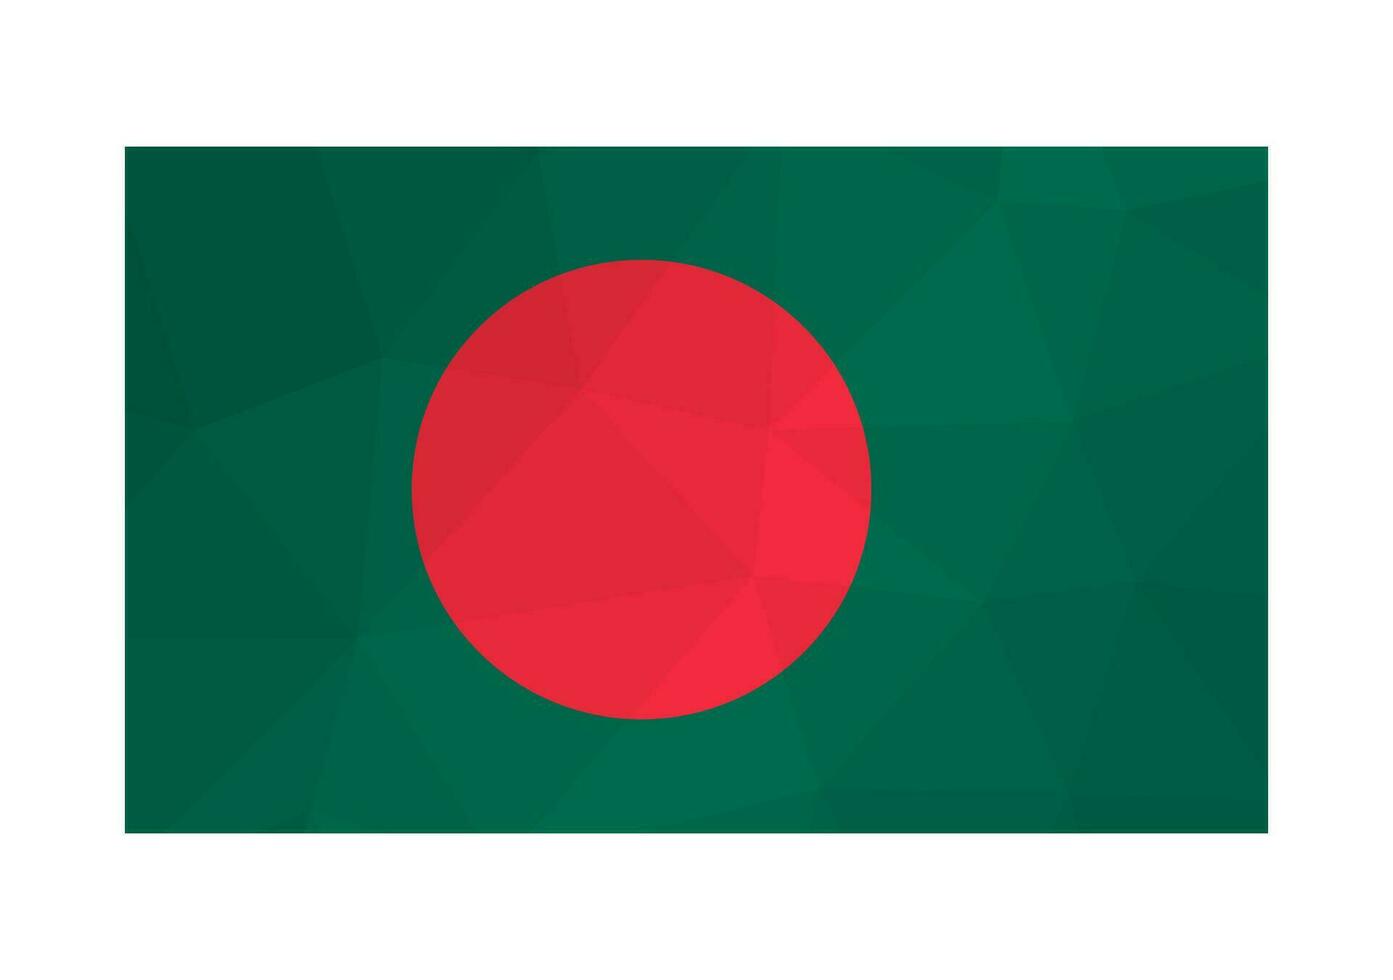 Vector isolated illustration. National bangladeshi flag with red dot, green background. Official symbol of Bangladesh. Creative design in low poly style with triangular shapes. Gradient effect.